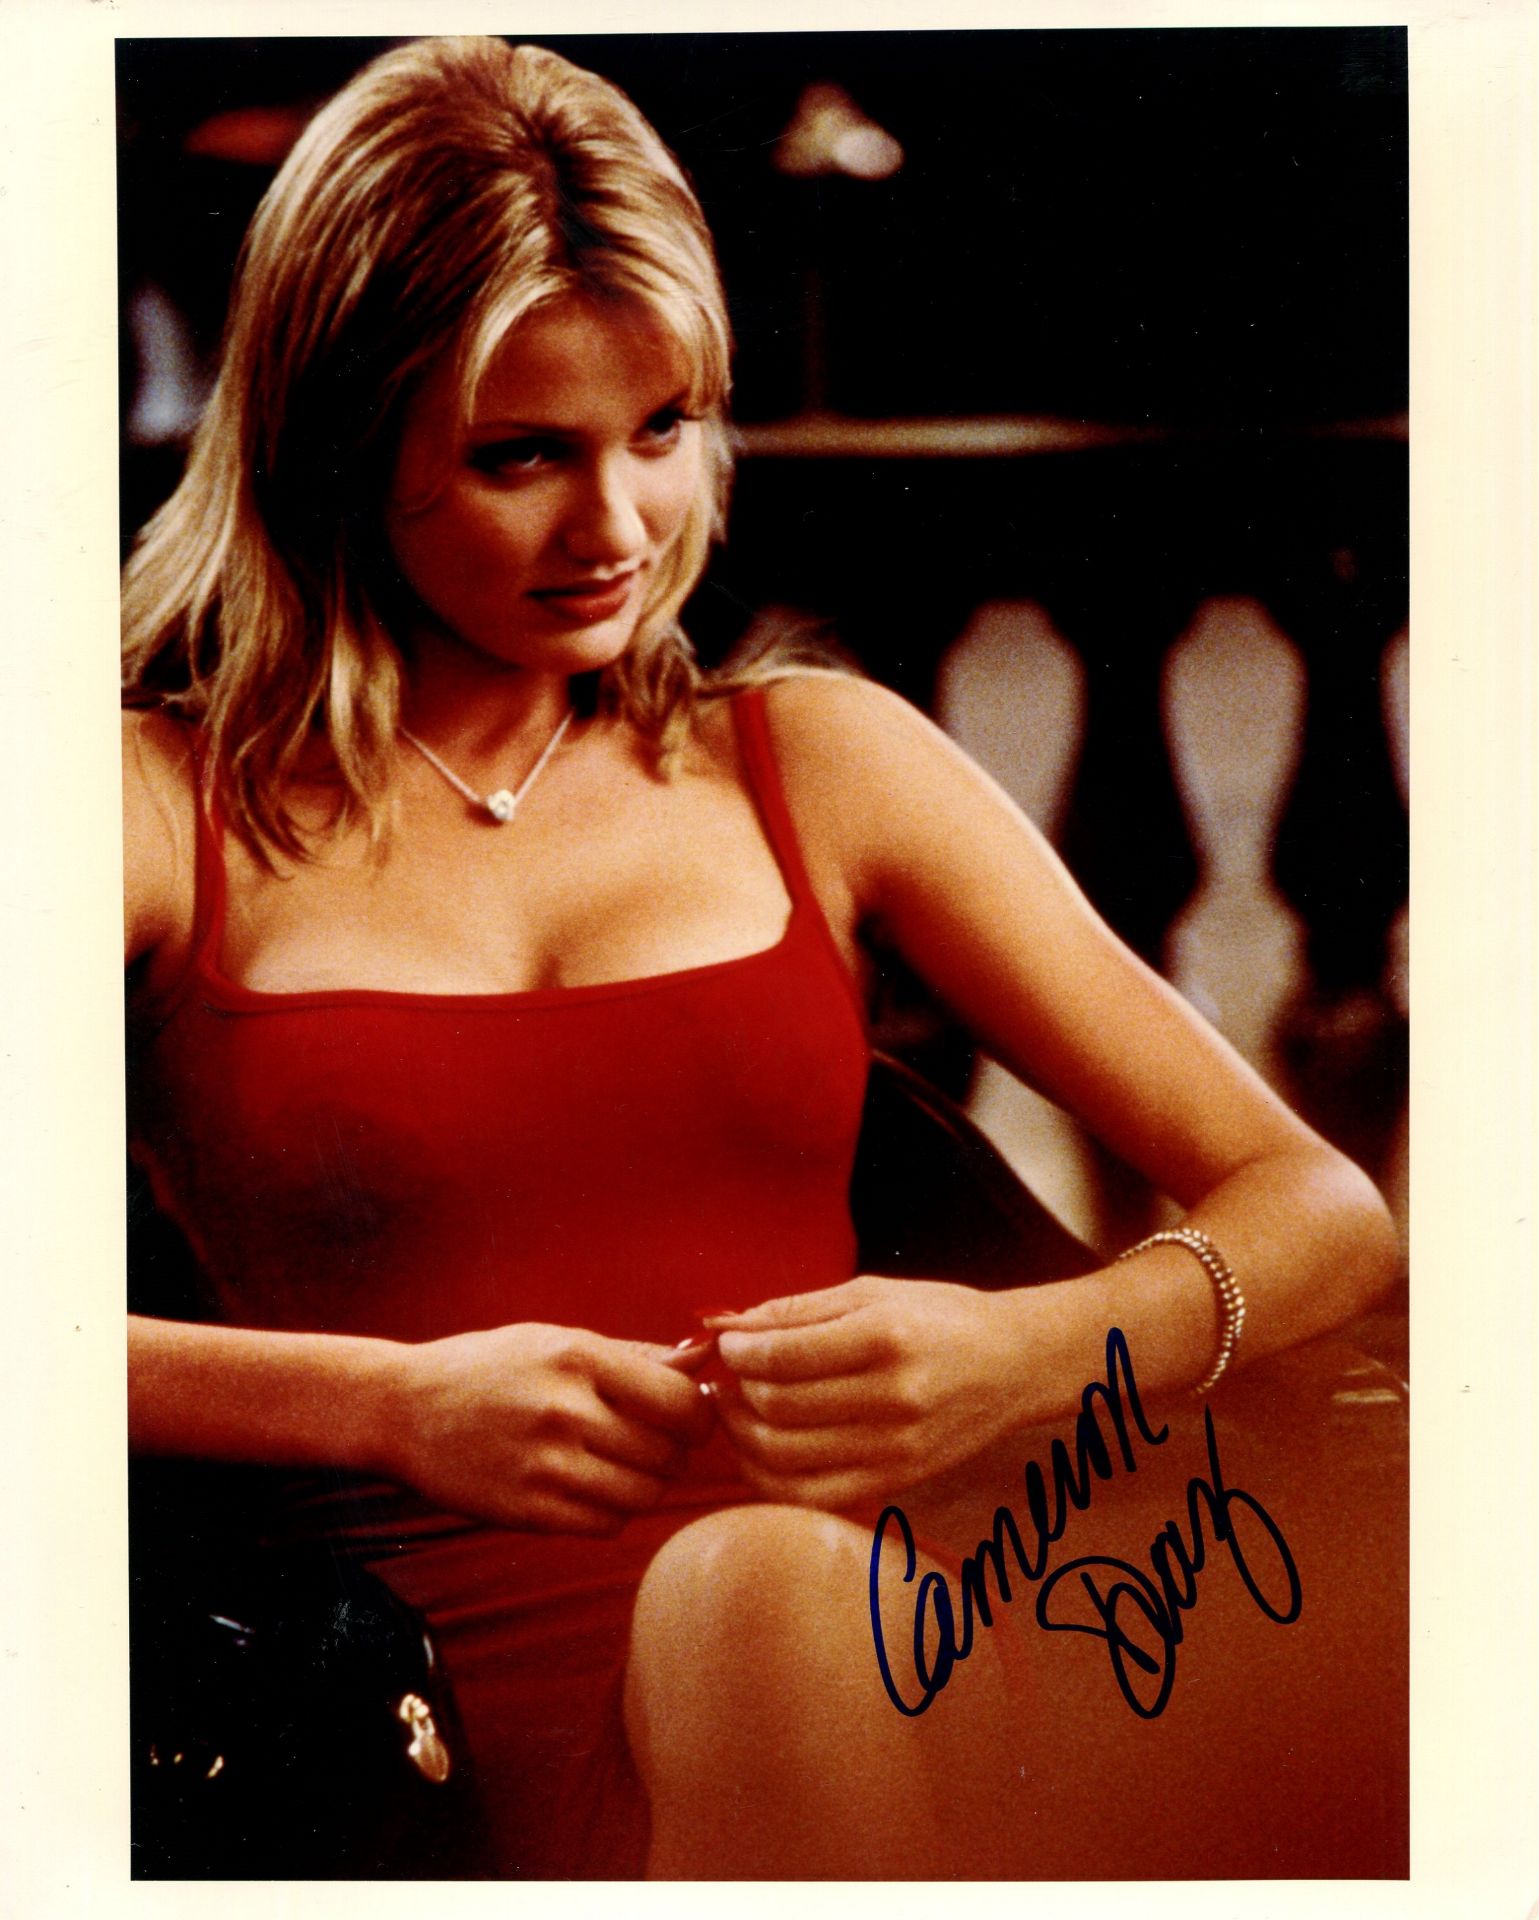 DIAZ CAMERON: (1972- ) American actress. Signed colour 8 x 10 photograph of Diaz seated in a three-